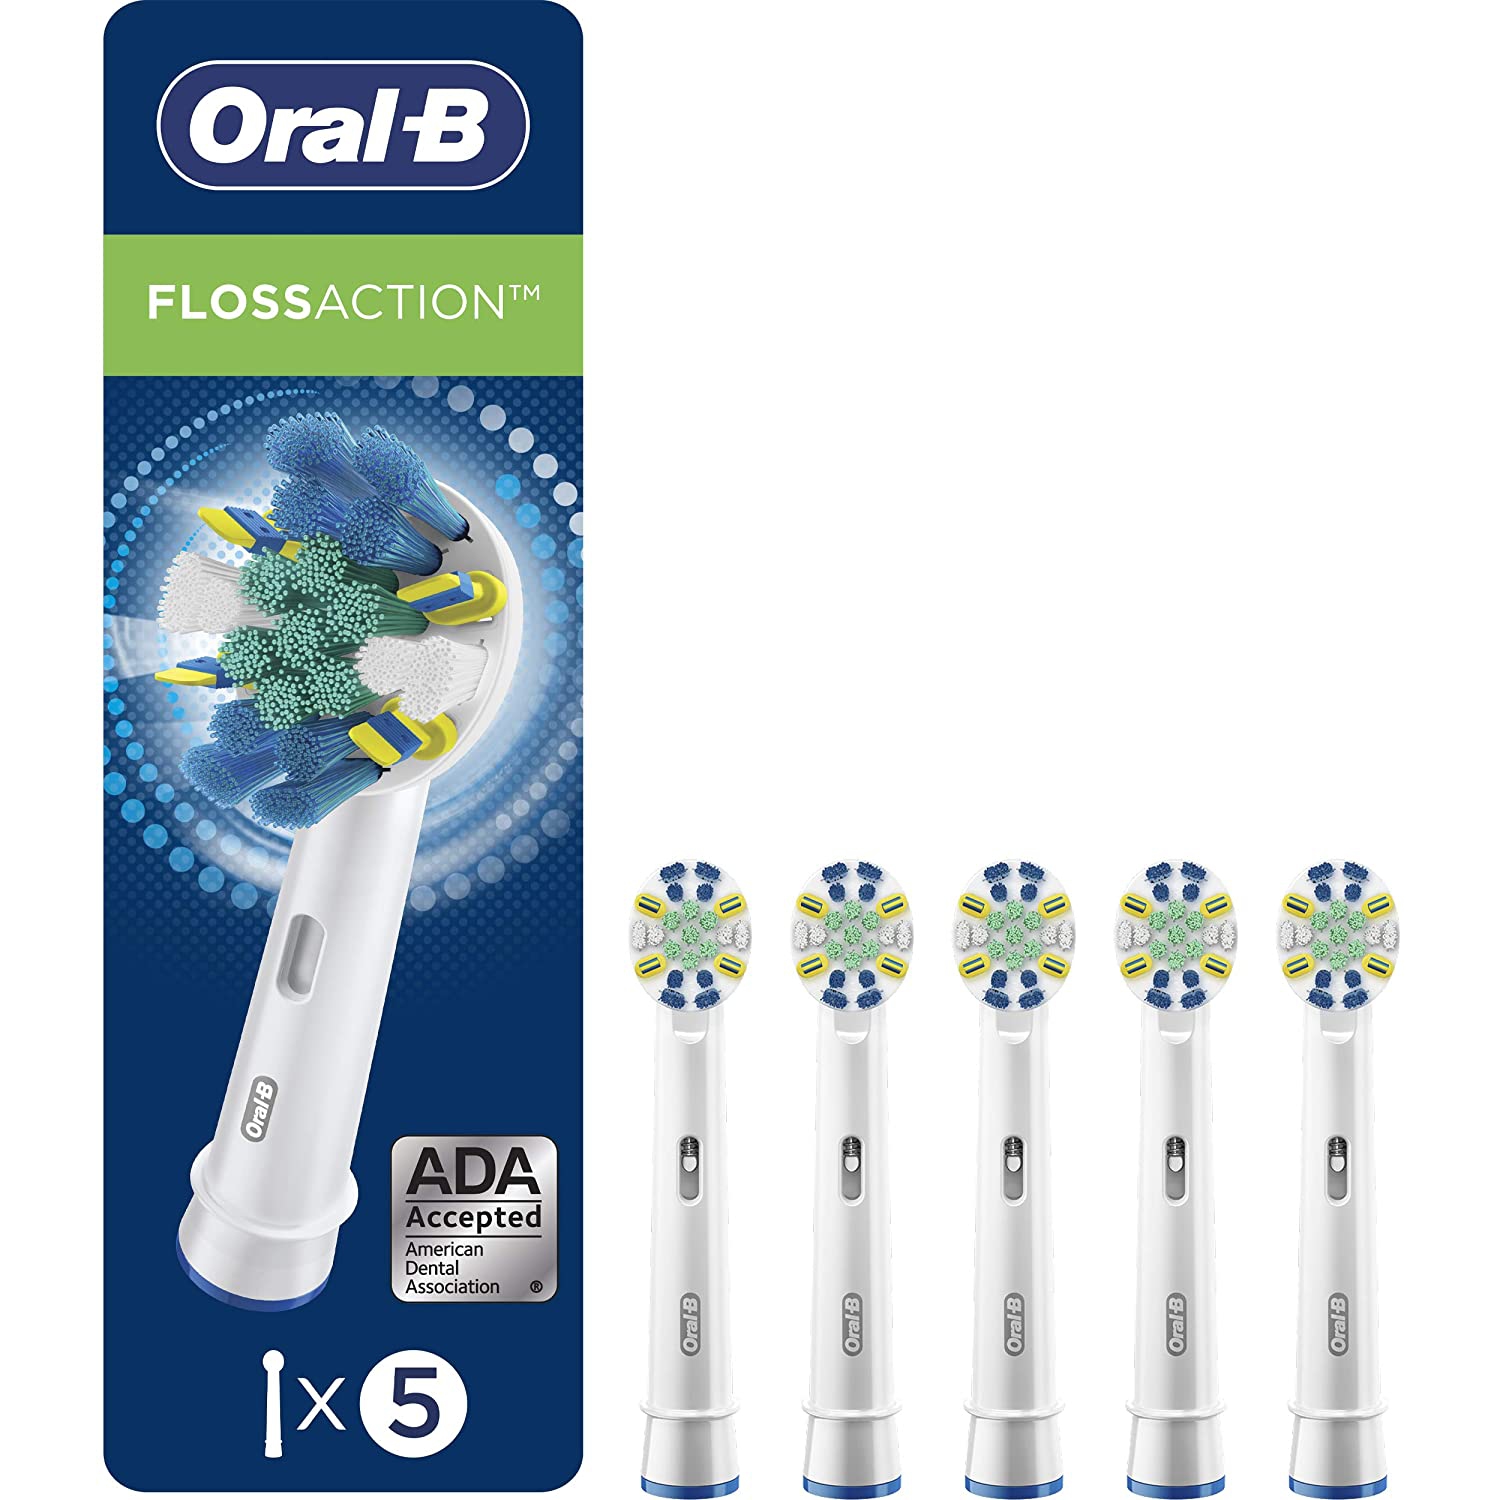 Oral-B FlossAction Replacement Brush Head - 5 count